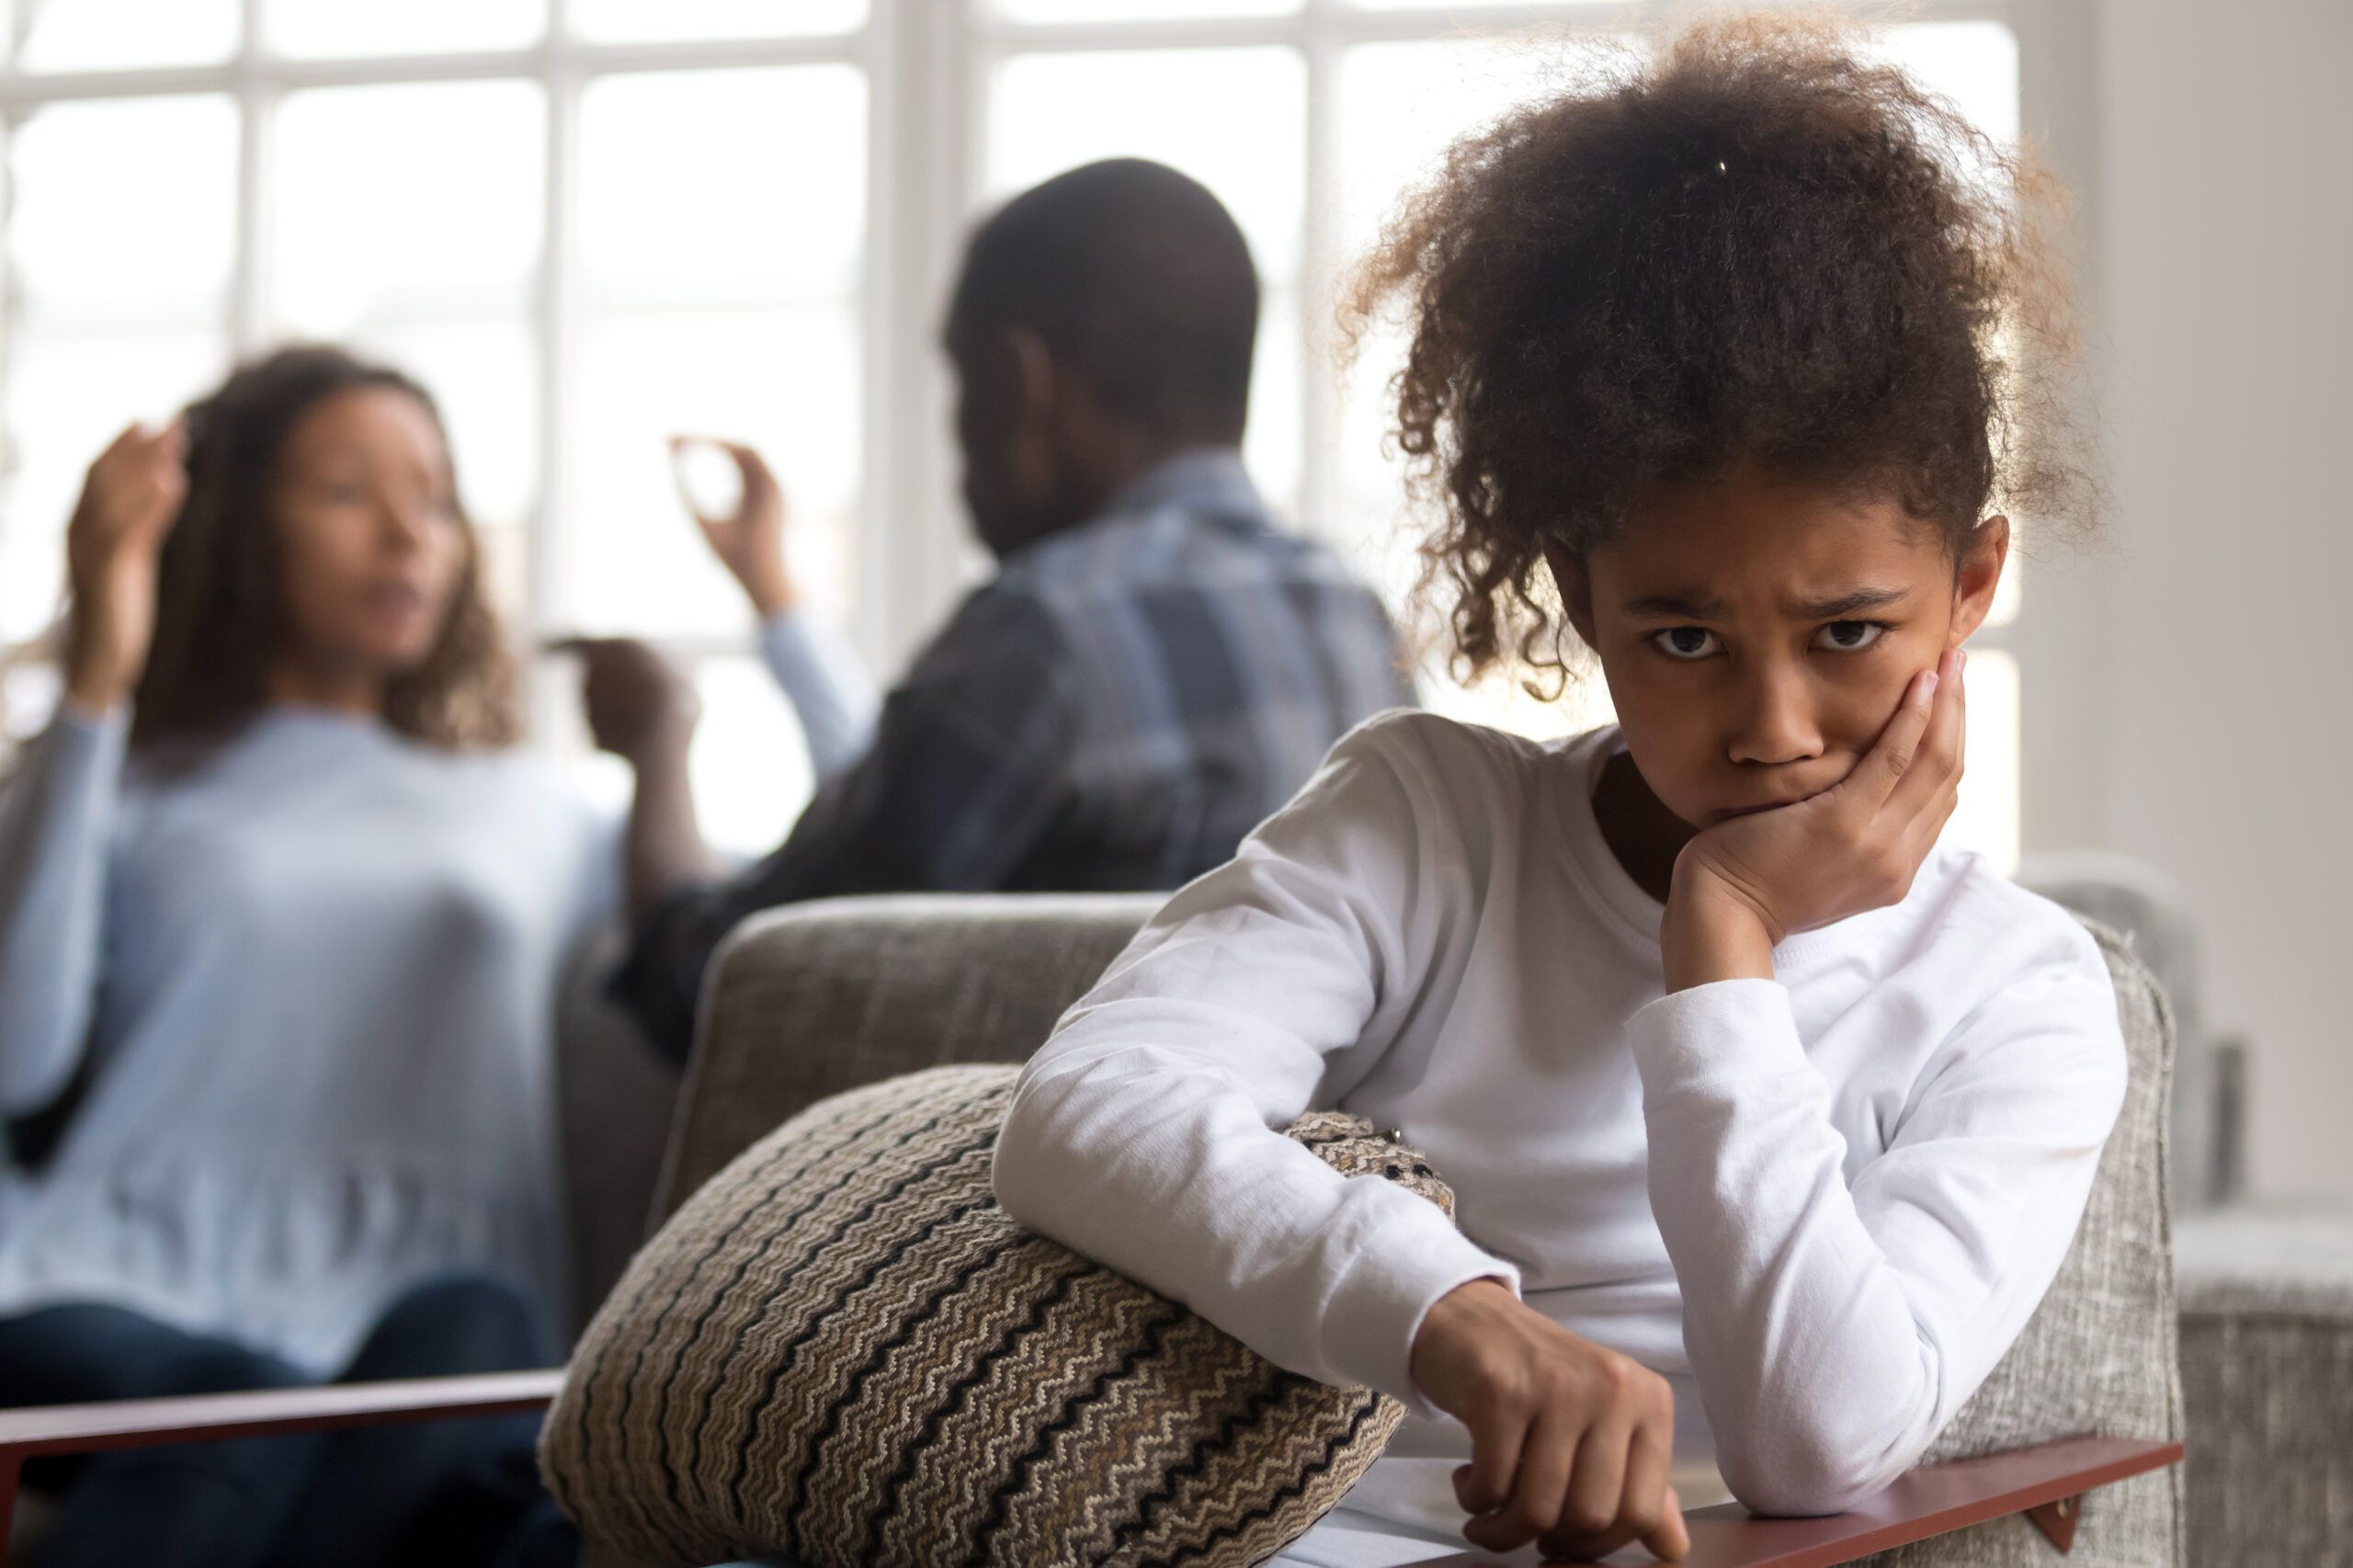 Unhappy child with arguing parents in the background | Philadelphia Child Support Lawyer